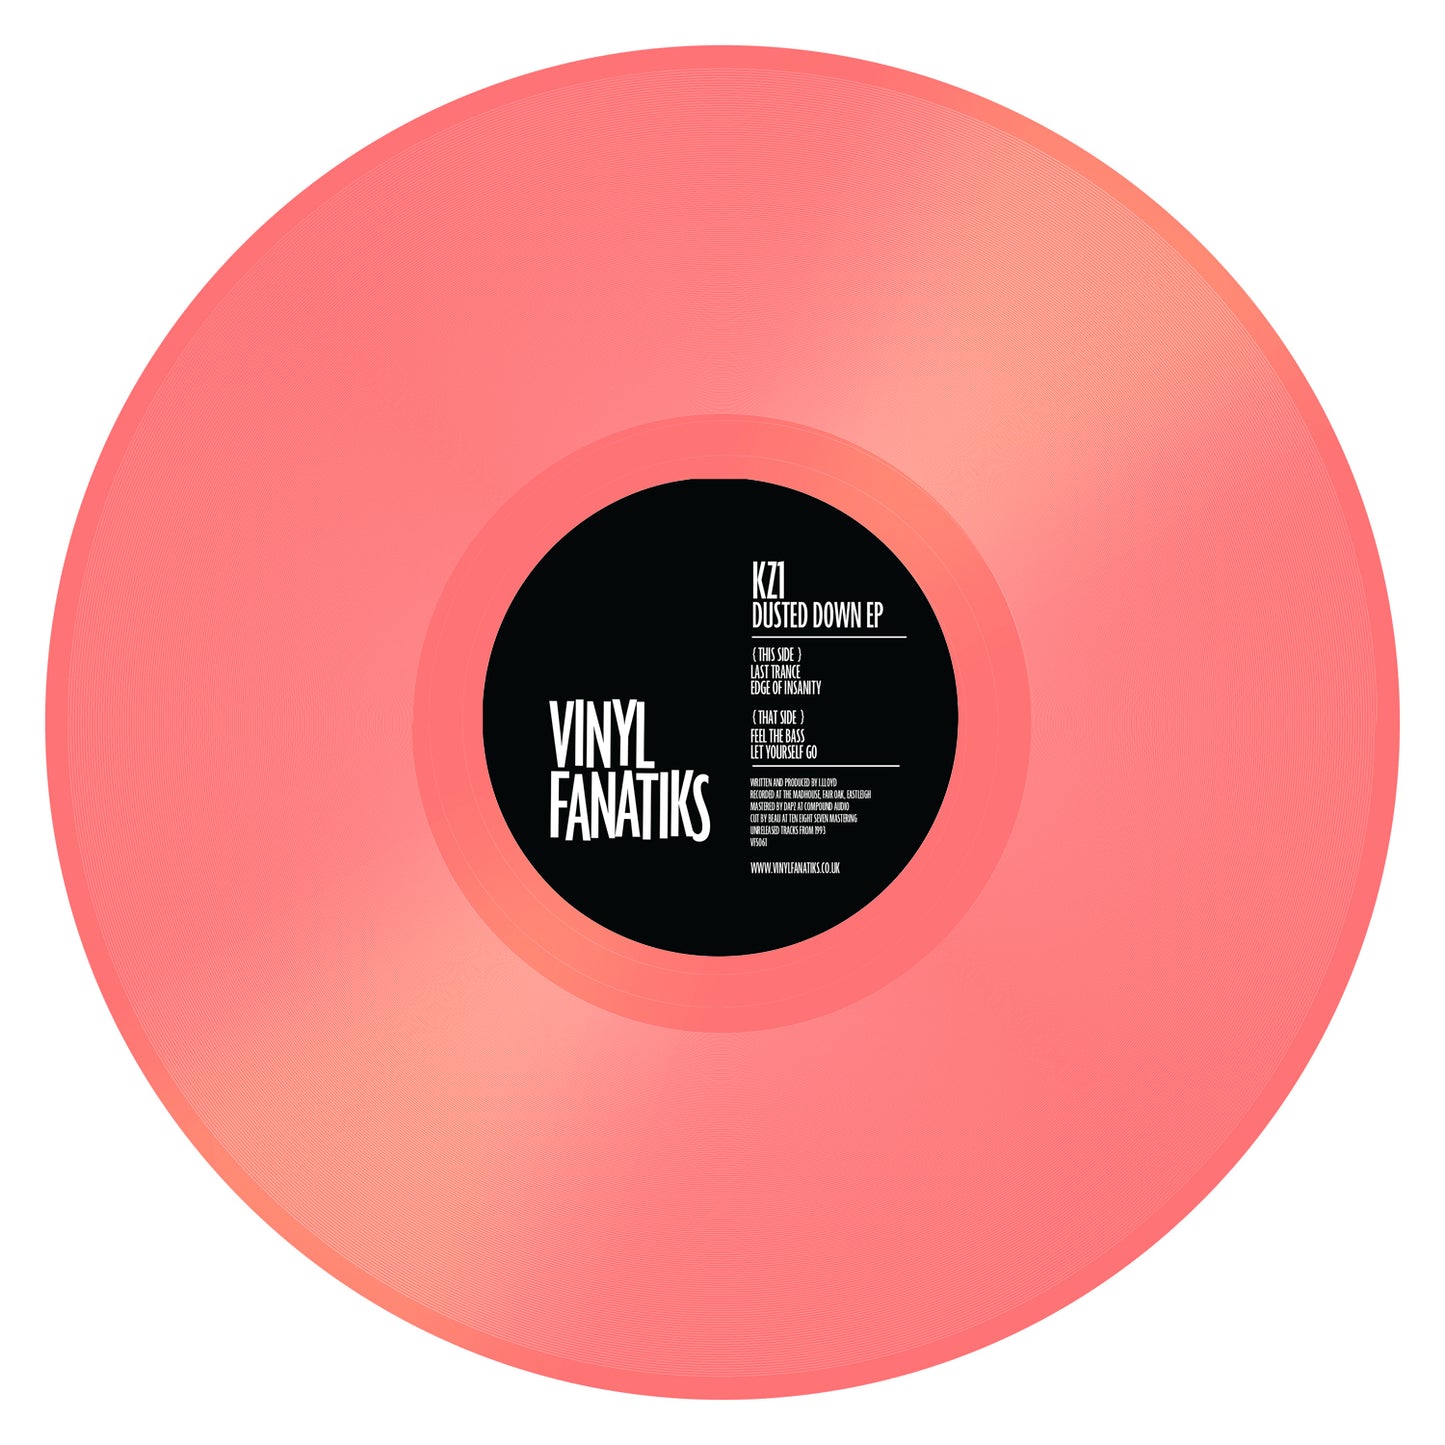 KZ1 – Dusted Down EP (12" Pink Vinyl)